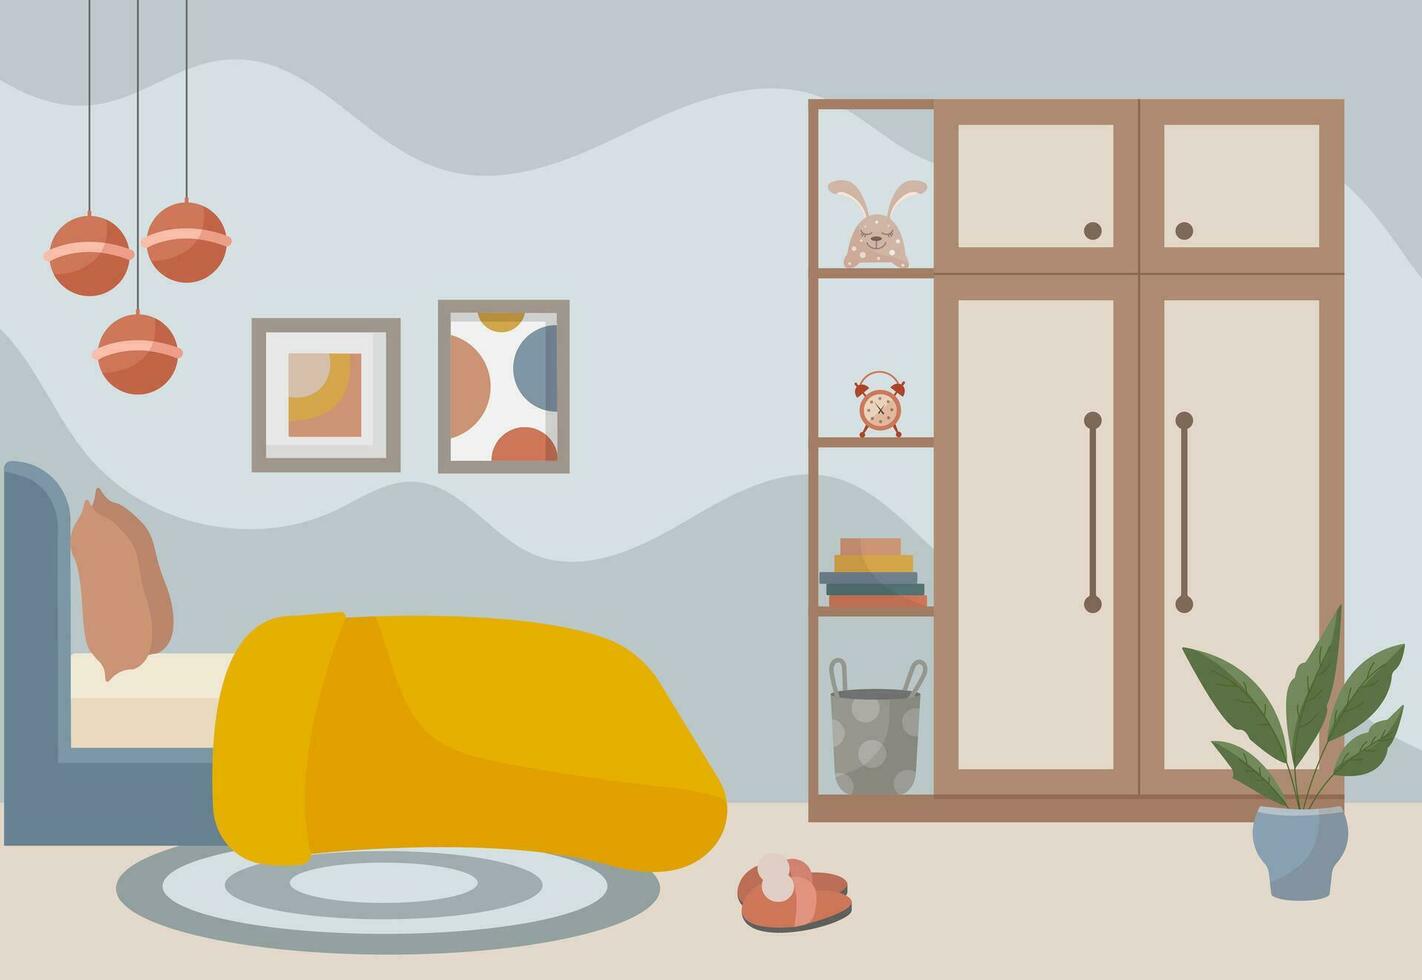 Bedroom interior bed, wardrobe, carpet, paintings, books, soft toy, flower in a pot. Interior concept. Vector flat illustration.